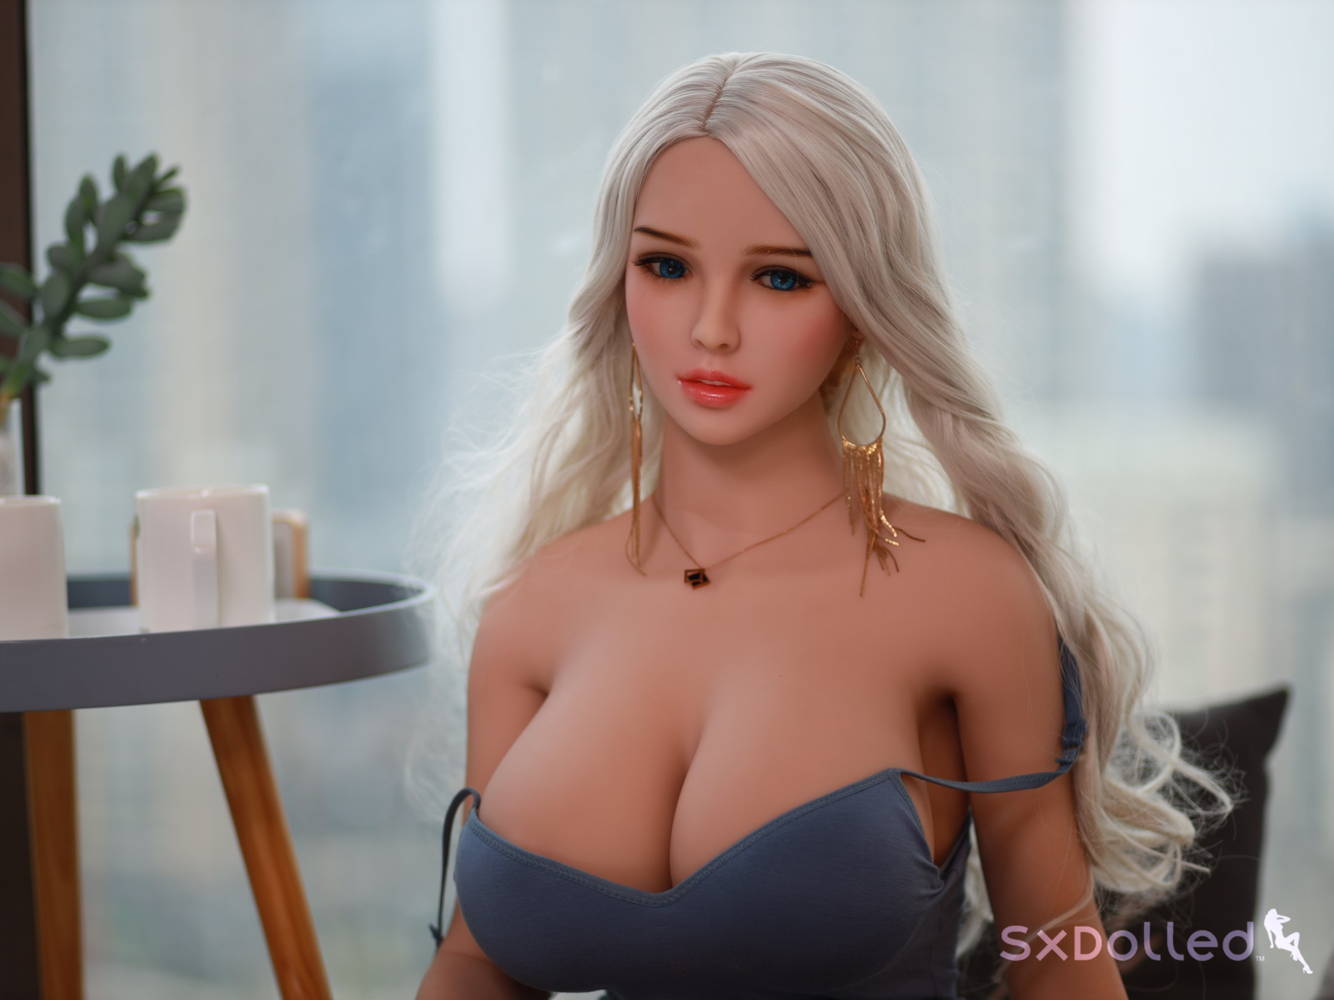 Are Sex Dolls Good For Virgins? | SxDolled